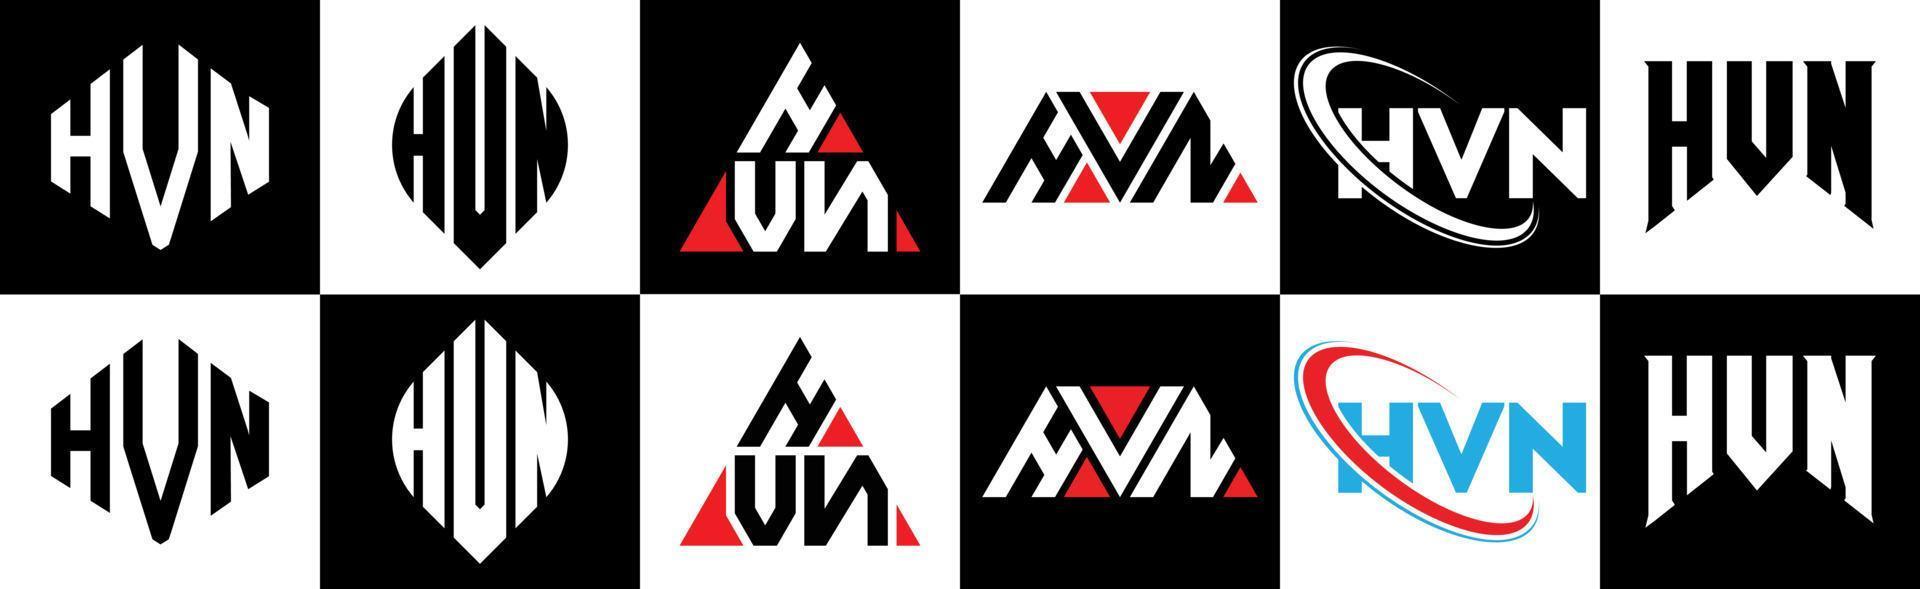 HVN letter logo design in six style. HVN polygon, circle, triangle, hexagon, flat and simple style with black and white color variation letter logo set in one artboard. HVN minimalist and classic logo vector